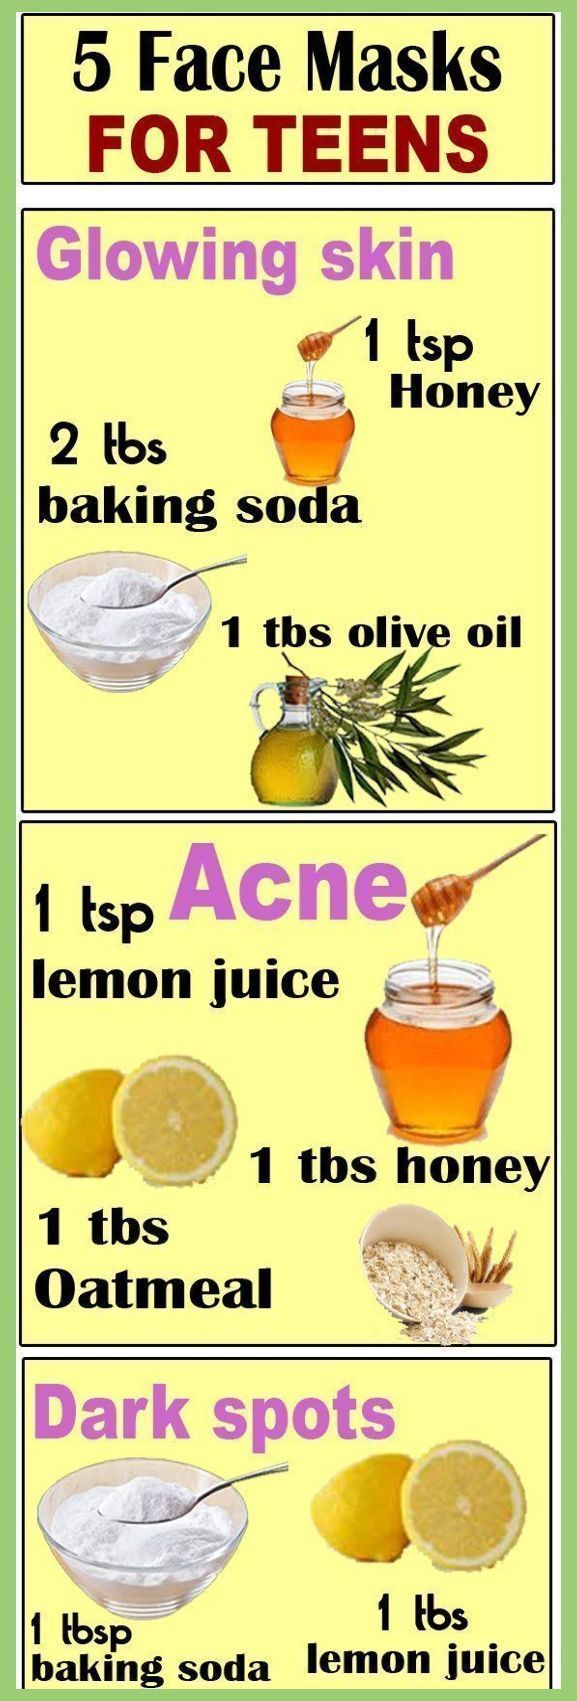 9 Diy Face Masks For Every Skin Type In 2020 - 9 Diy Face Masks For Every Skin Type In 2020 -   16 diy Face Mask for scars ideas